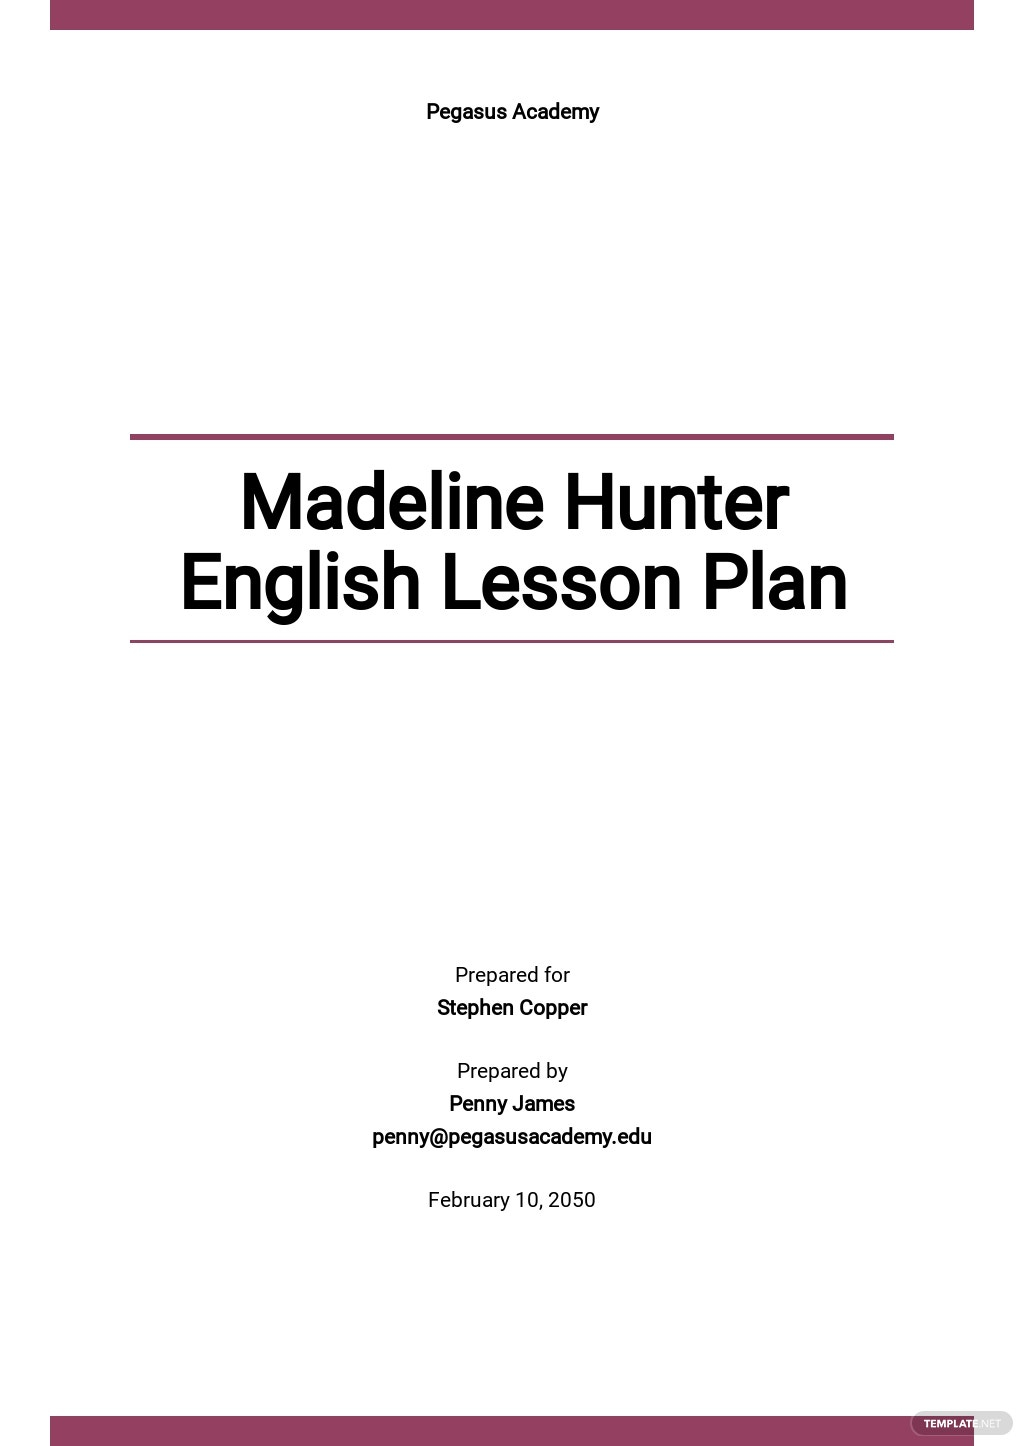 Madeline Hunter English Lesson Plan Template - Google Docs  With Madeline Hunter Lesson Plan Blank Template